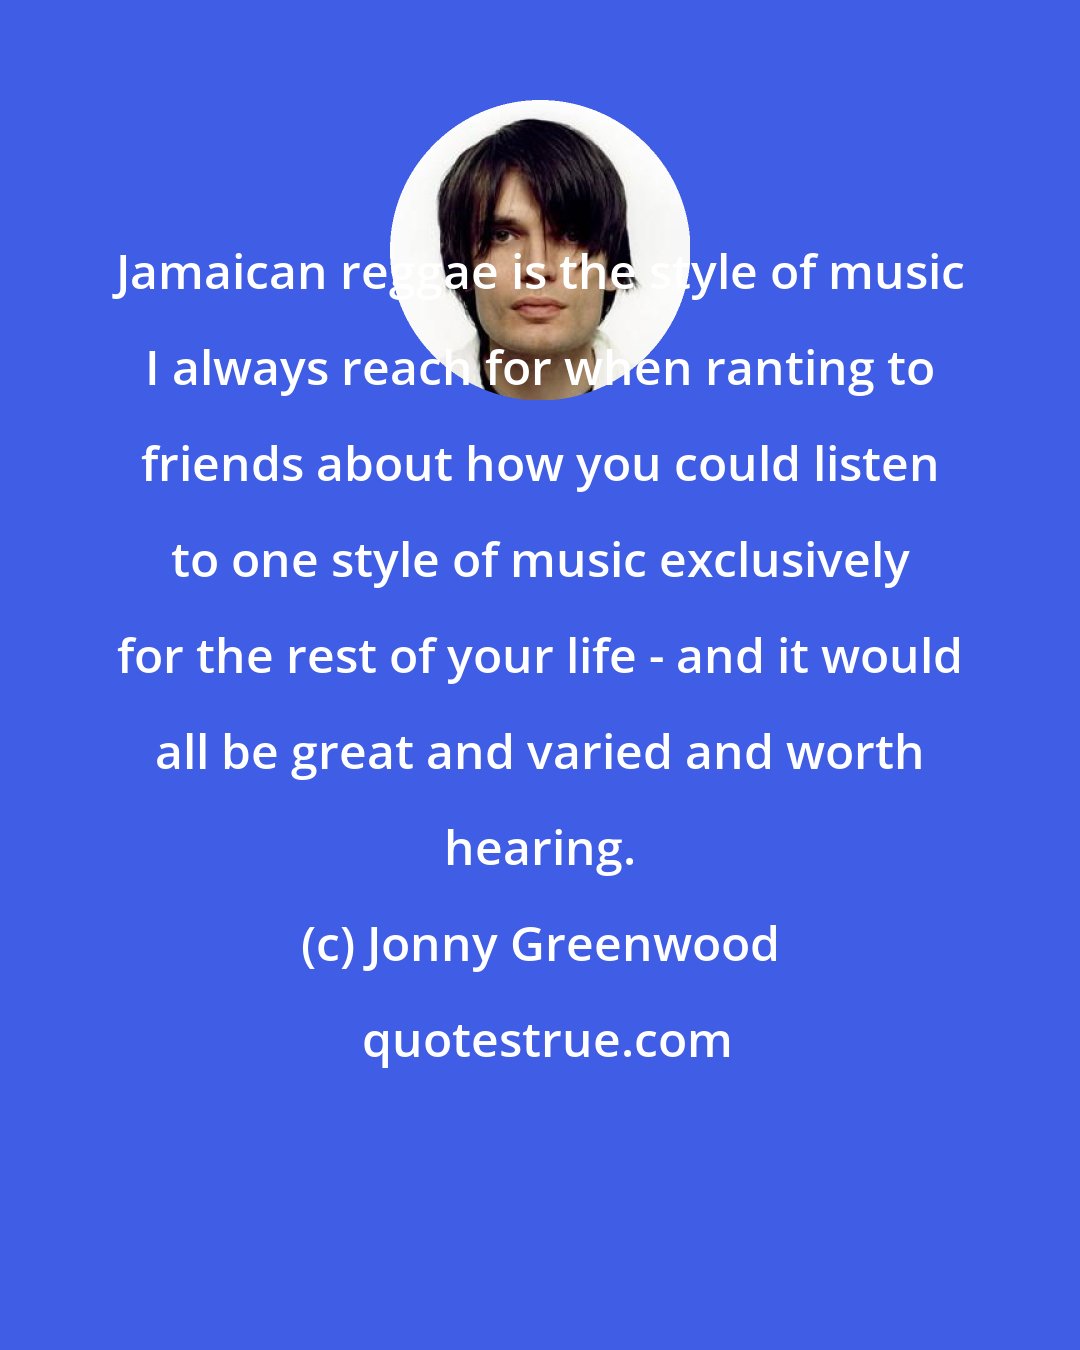 Jonny Greenwood: Jamaican reggae is the style of music I always reach for when ranting to friends about how you could listen to one style of music exclusively for the rest of your life - and it would all be great and varied and worth hearing.